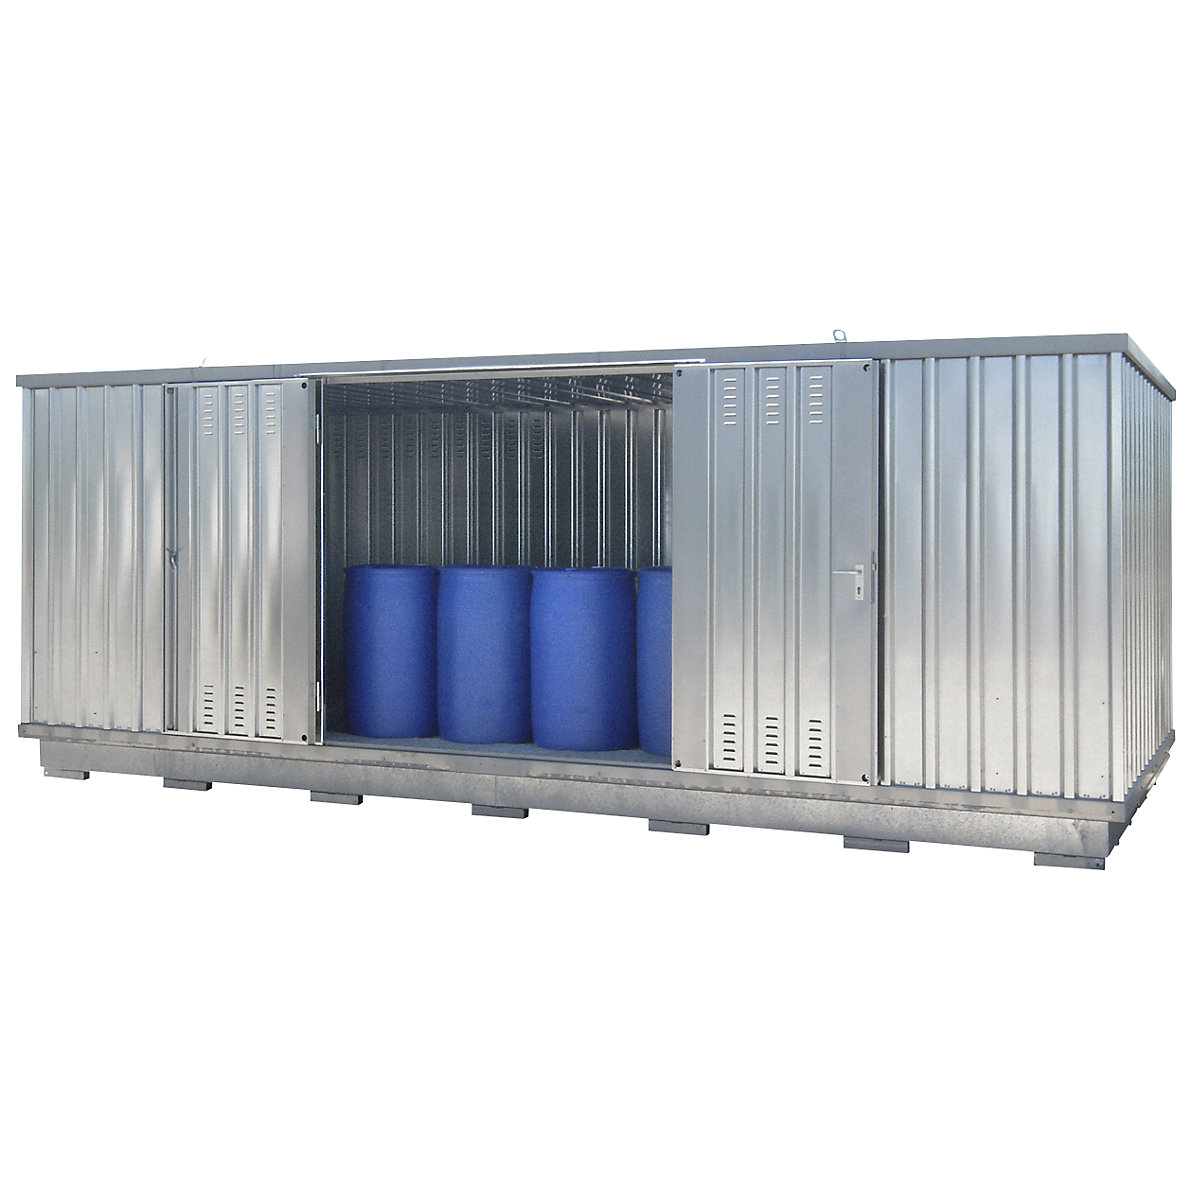 Hazardous goods container also for the active storage of flammable media, external HxWxD 2385 x 6075 x 2875 mm, zinc plated